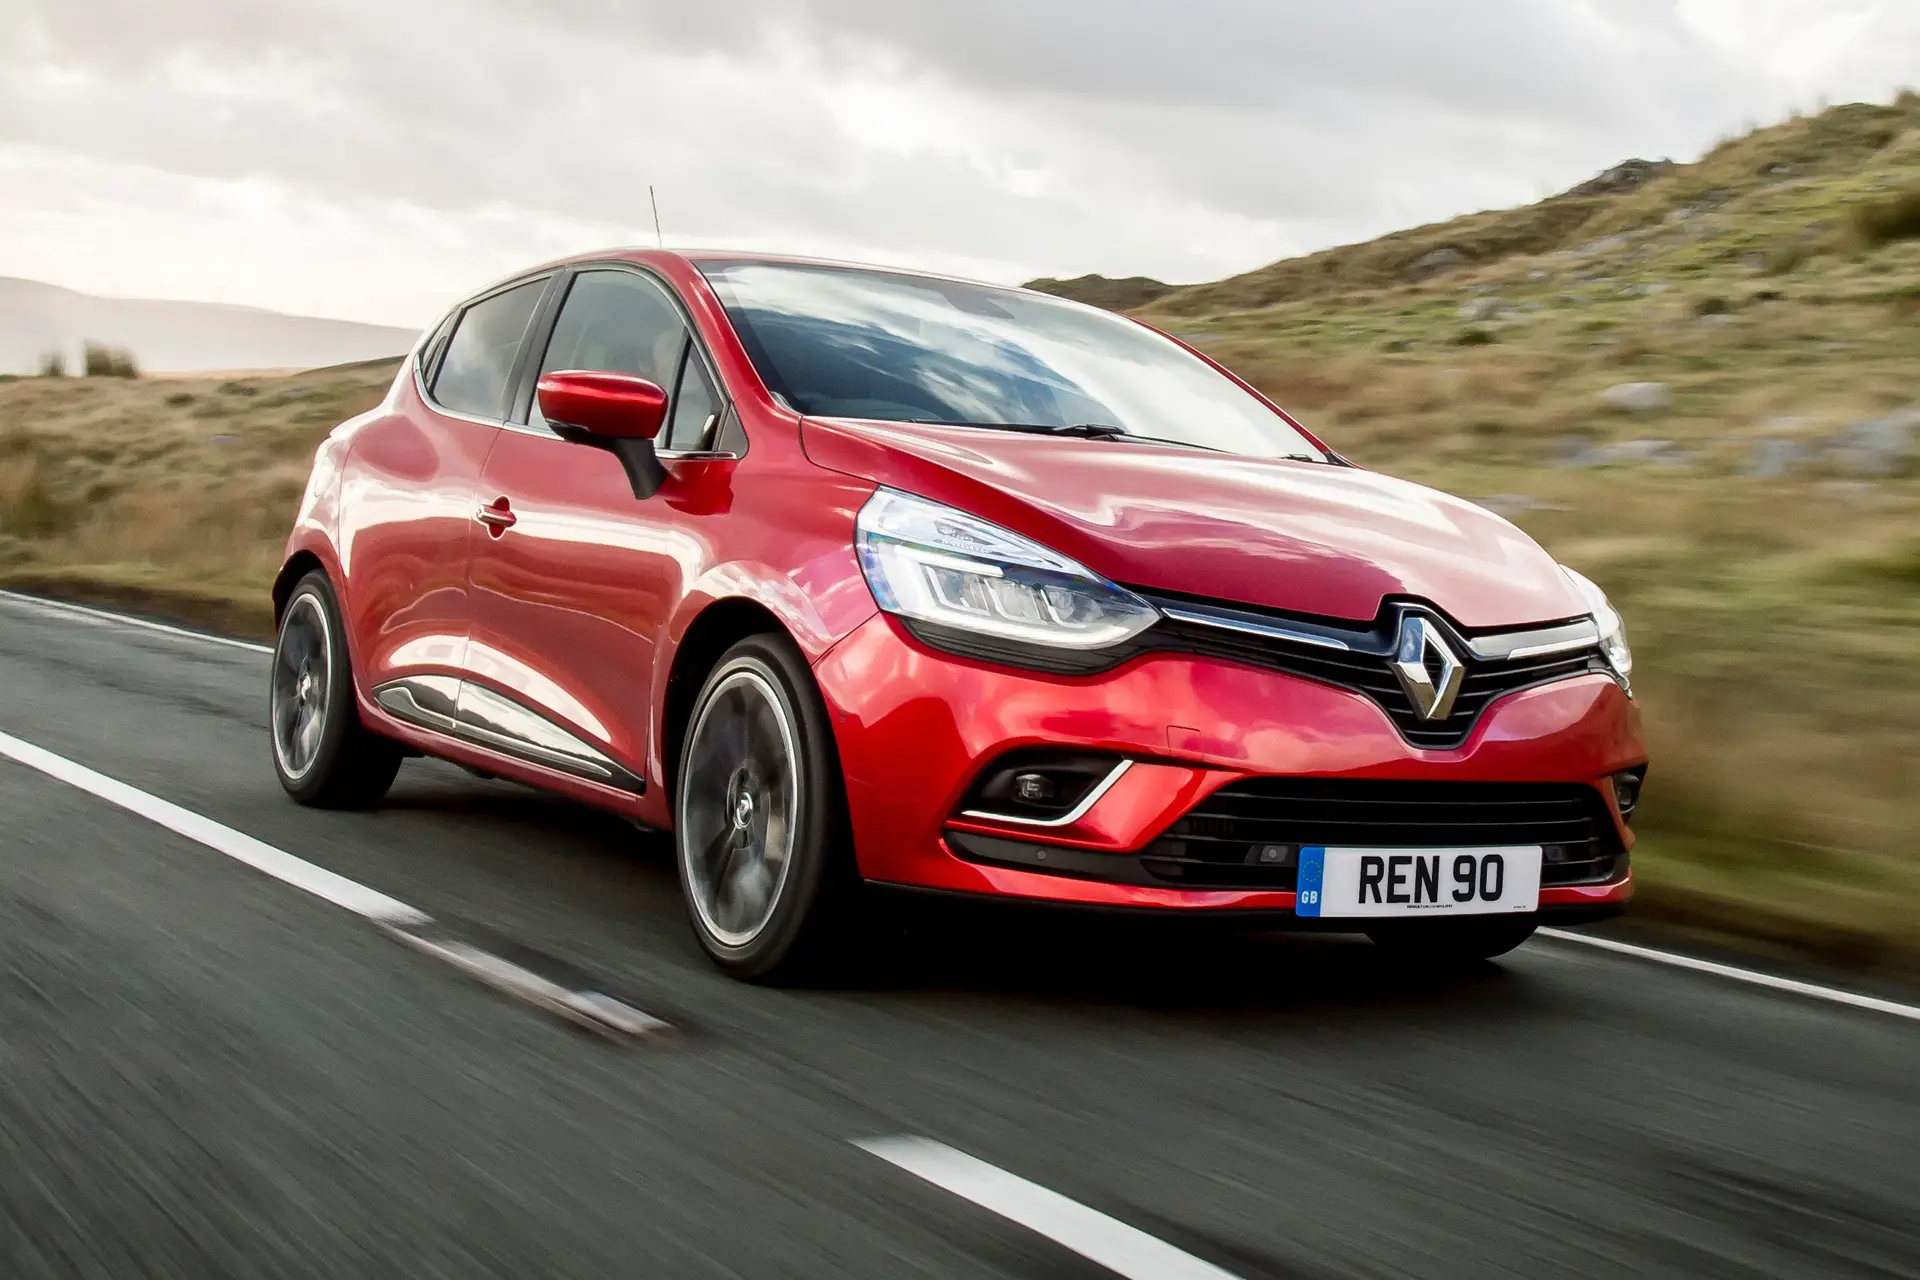 Renault Clio (2013-2019) Review: exterior front three quarter photo of the Renault Clio on the road